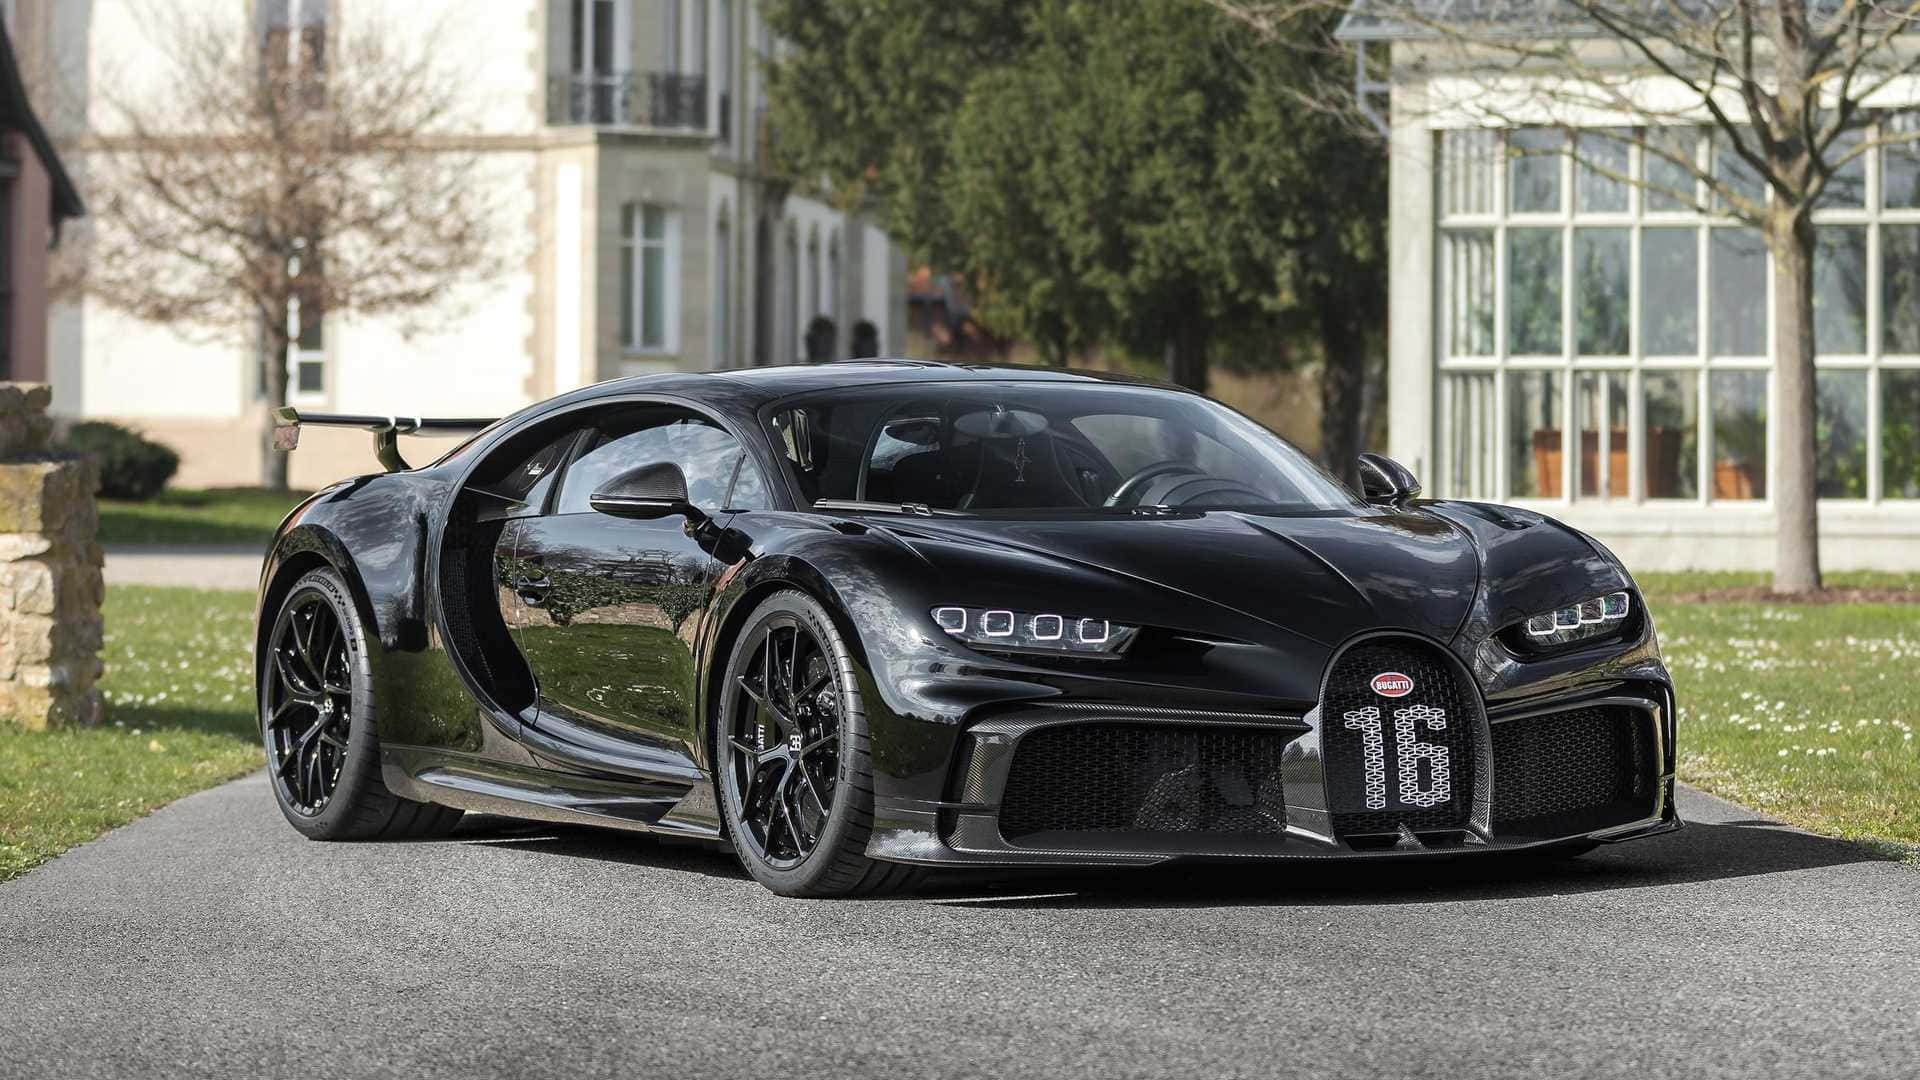 Exquisite Luxury and Power with the Bugatti Car Wallpaper